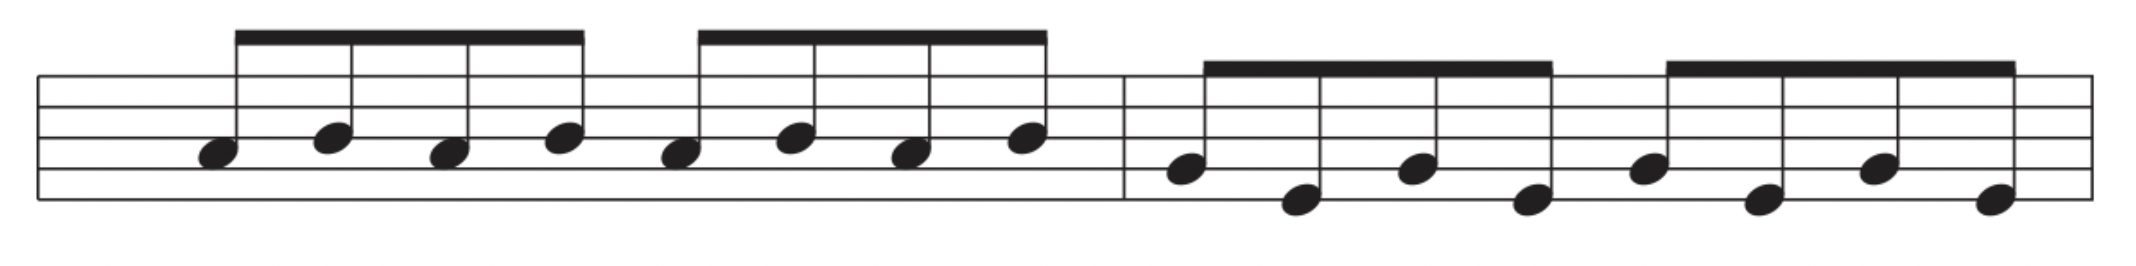 Straight eighth notes are shown in musical notation.